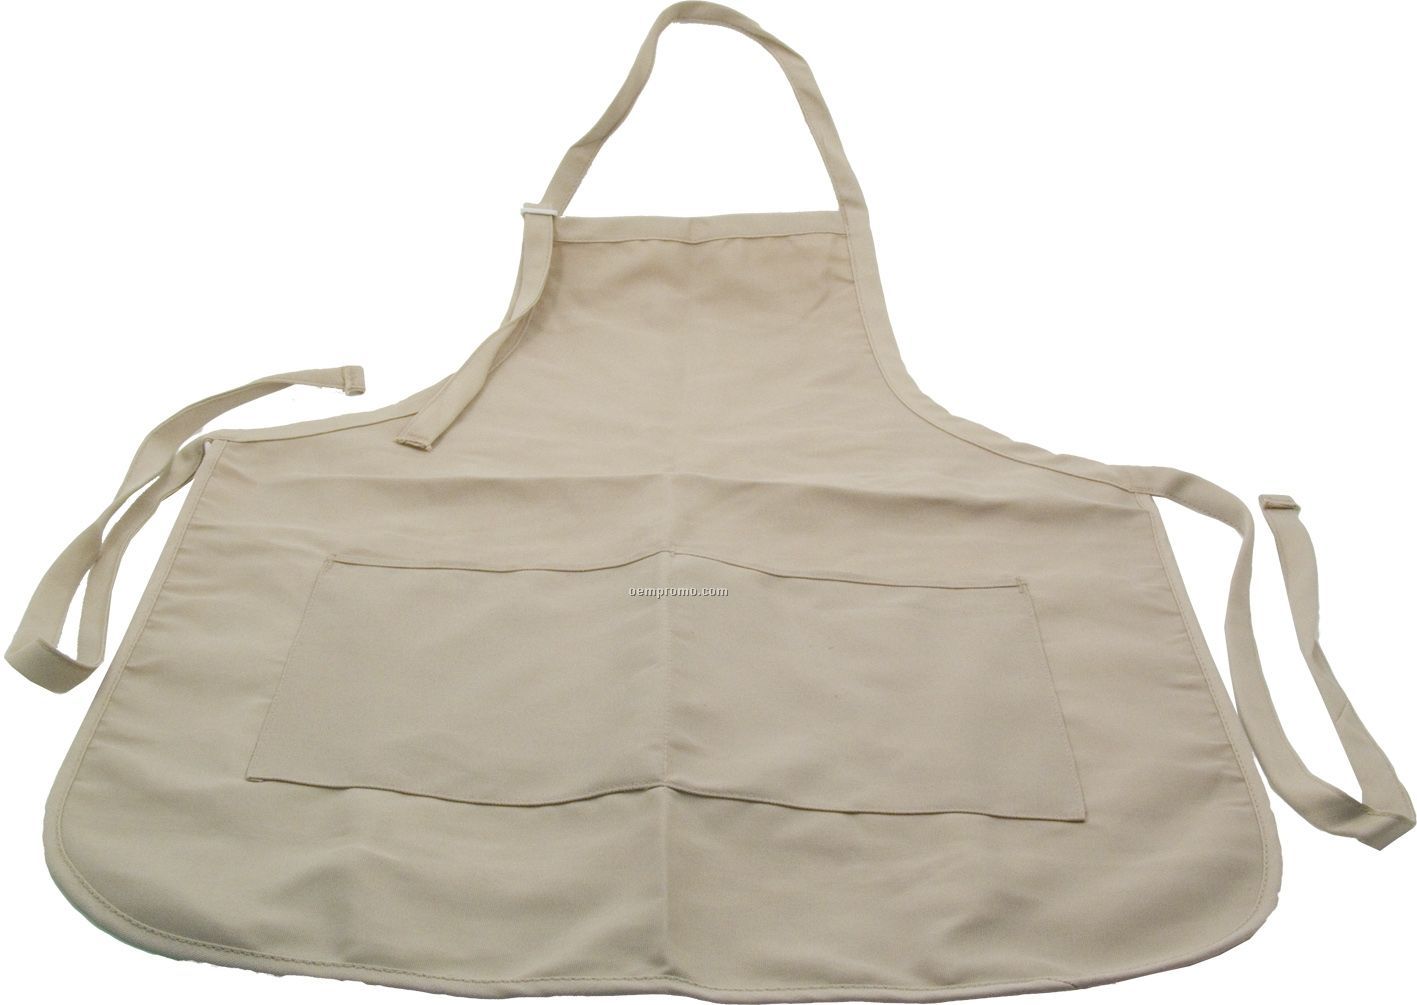 Long Apron - 23"X28" (Overseas 6-7 Week Delivery)